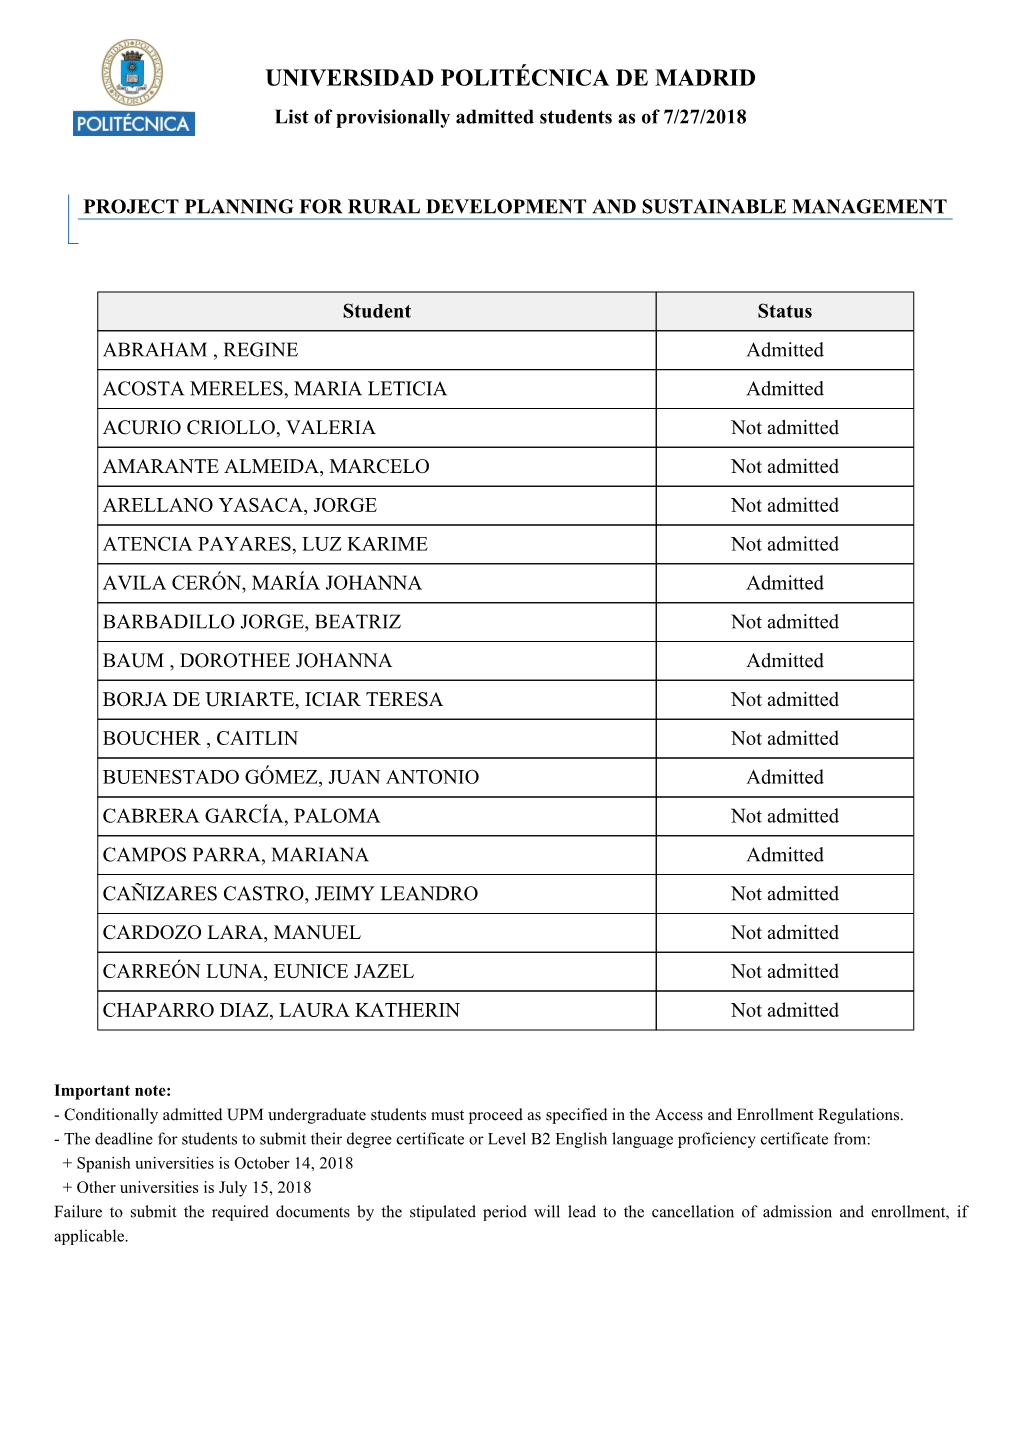 UNIVERSIDAD POLITÉCNICA DE MADRID List of Provisionally Admitted Students As of 7/27/2018